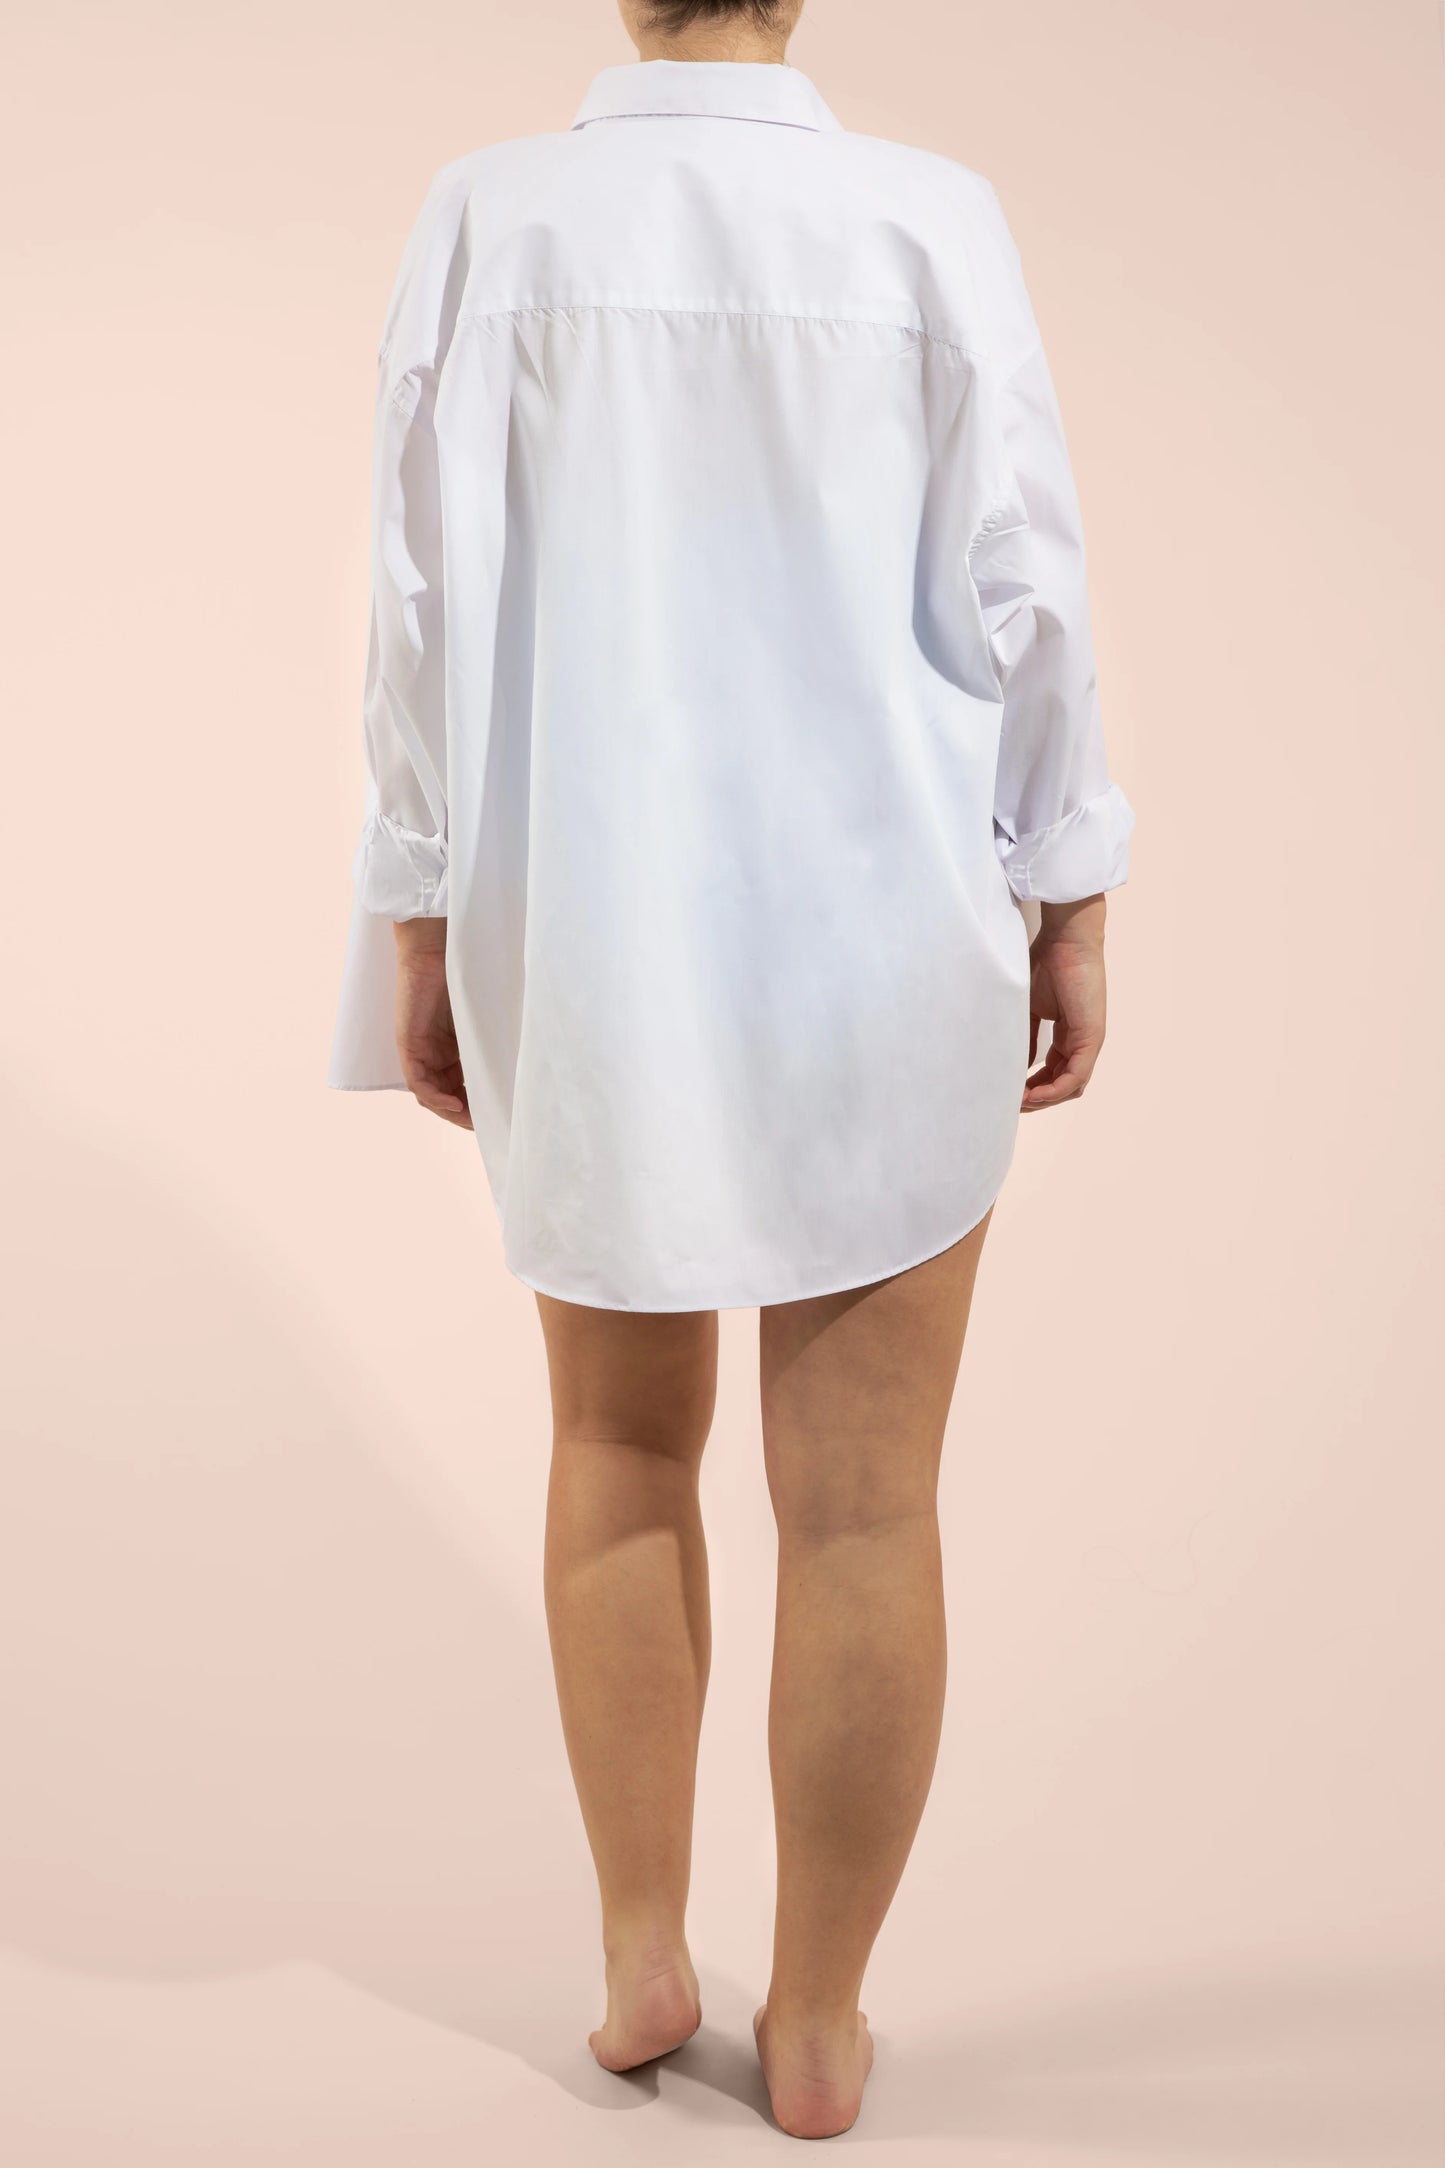 OVERSIZED SHIRT IN PEARL